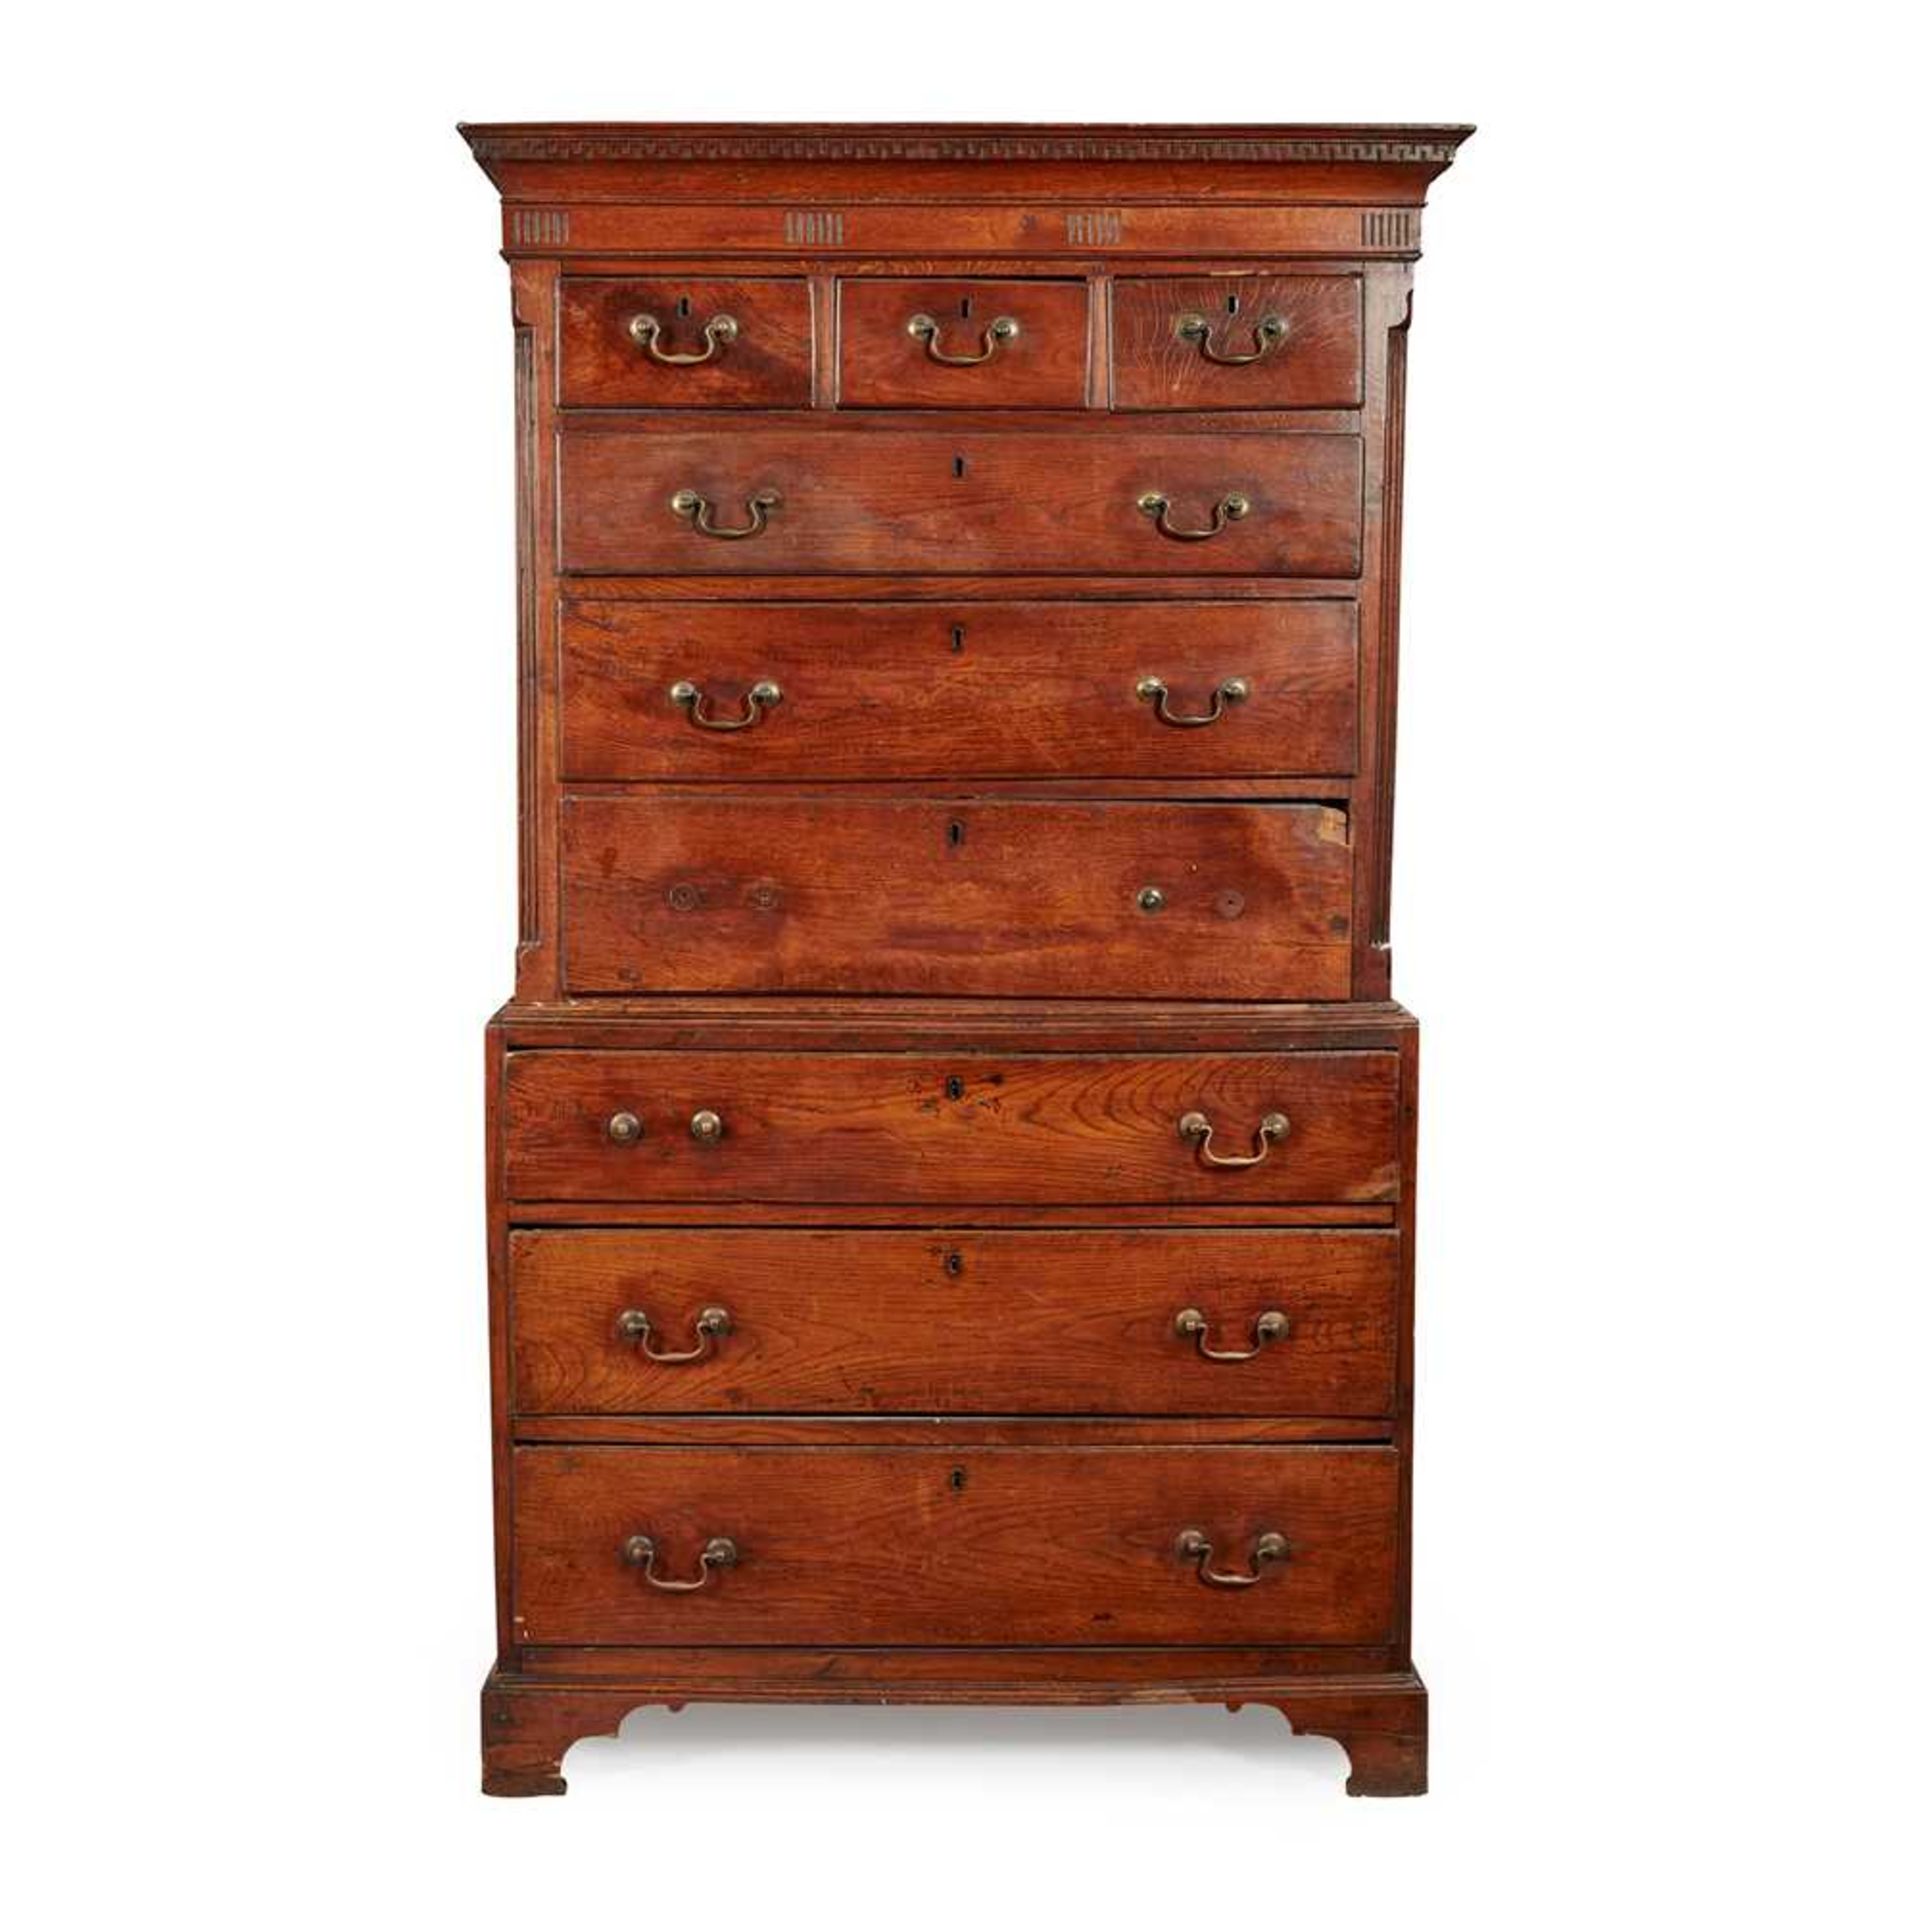 A GEORGE III OAK CHEST ON CHEST LATE 18TH CENTURY